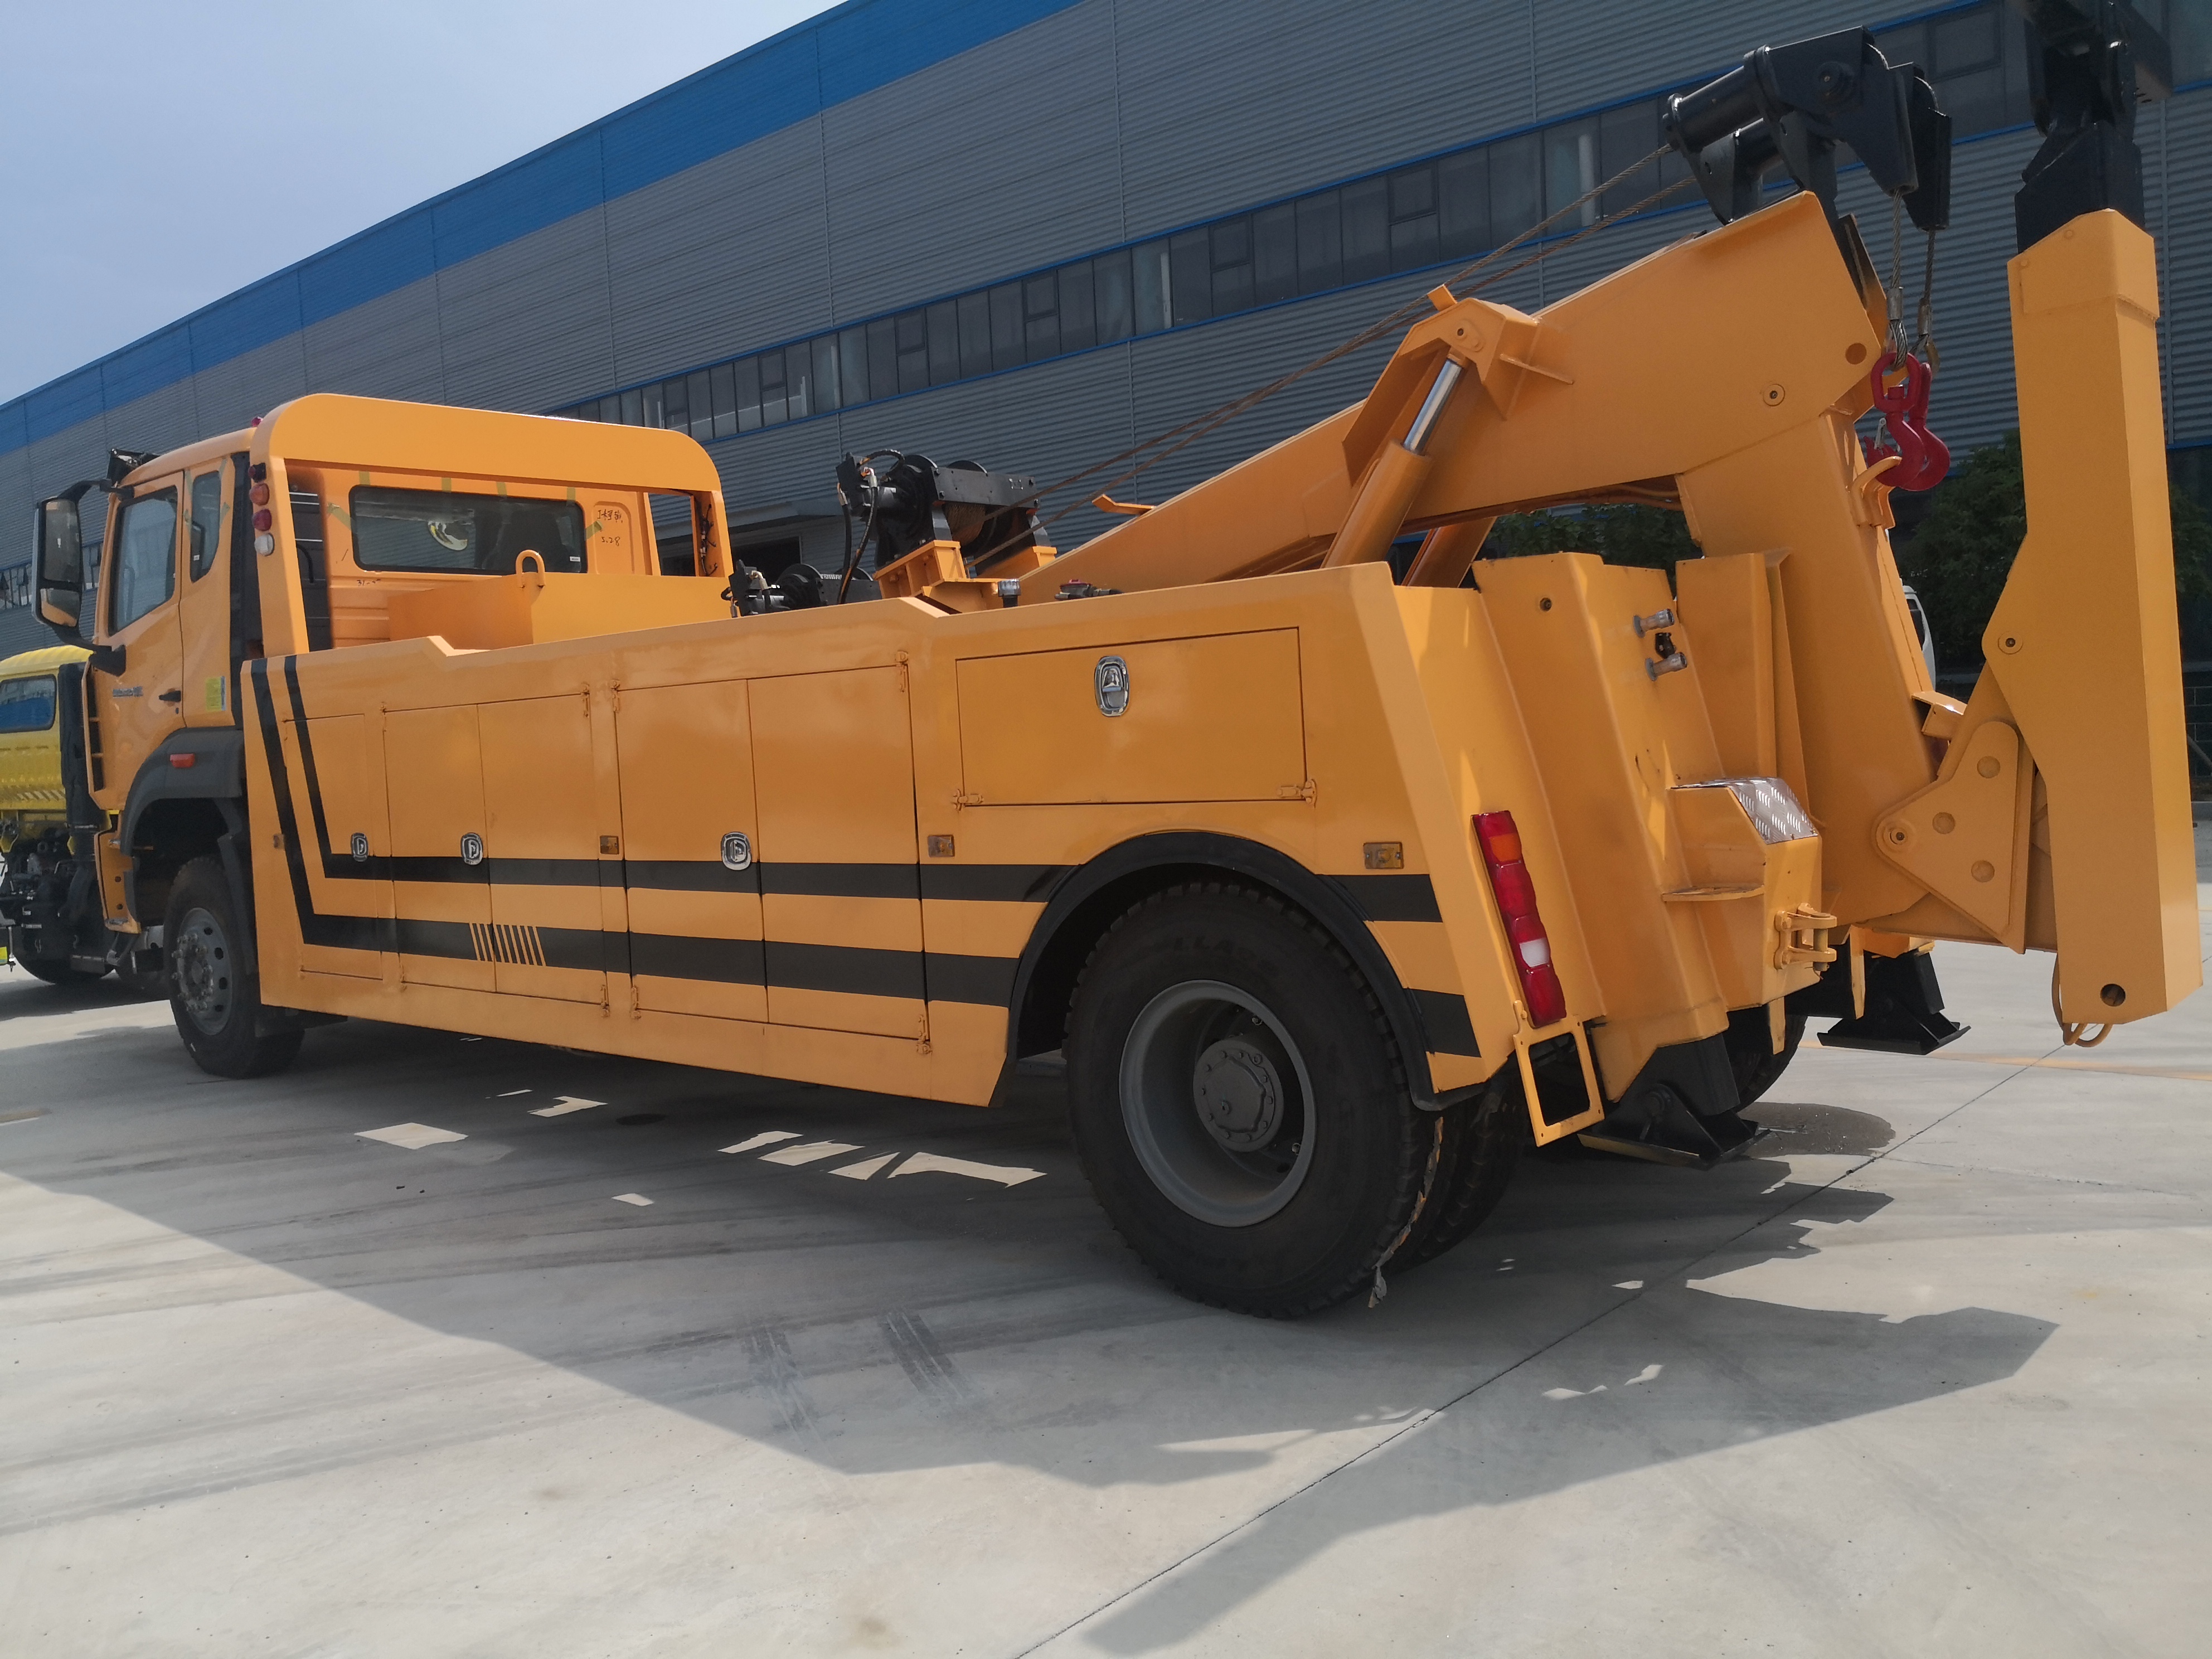 Heavy Duty Road Recovery Wrecker Tow Truck with Crane One-to-one Multipurpose Platform Carrier Sinotruck